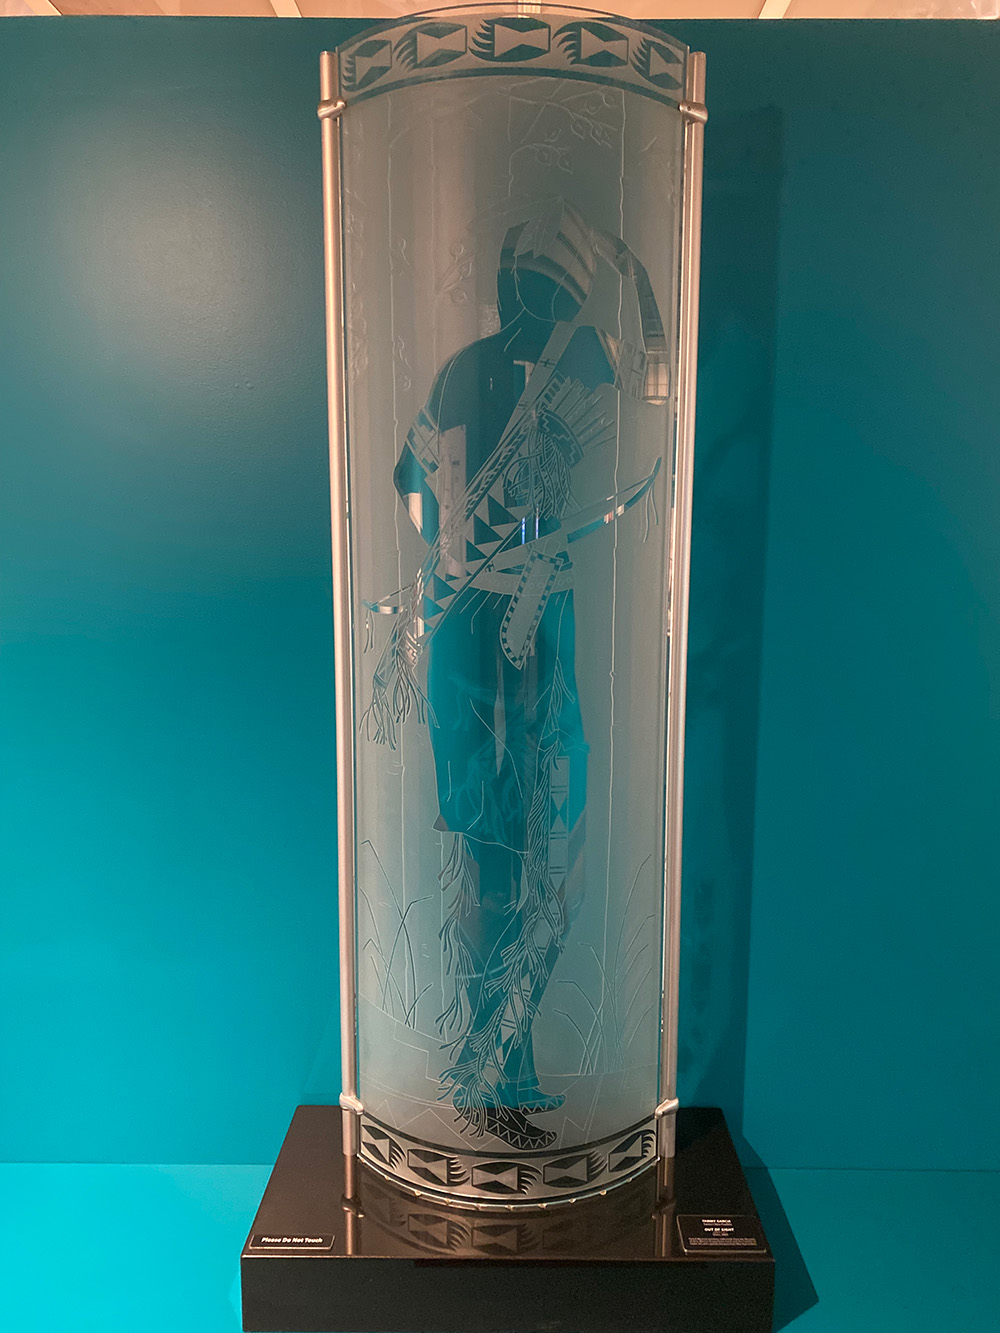 A tall glass curved panel with a person's silhouette